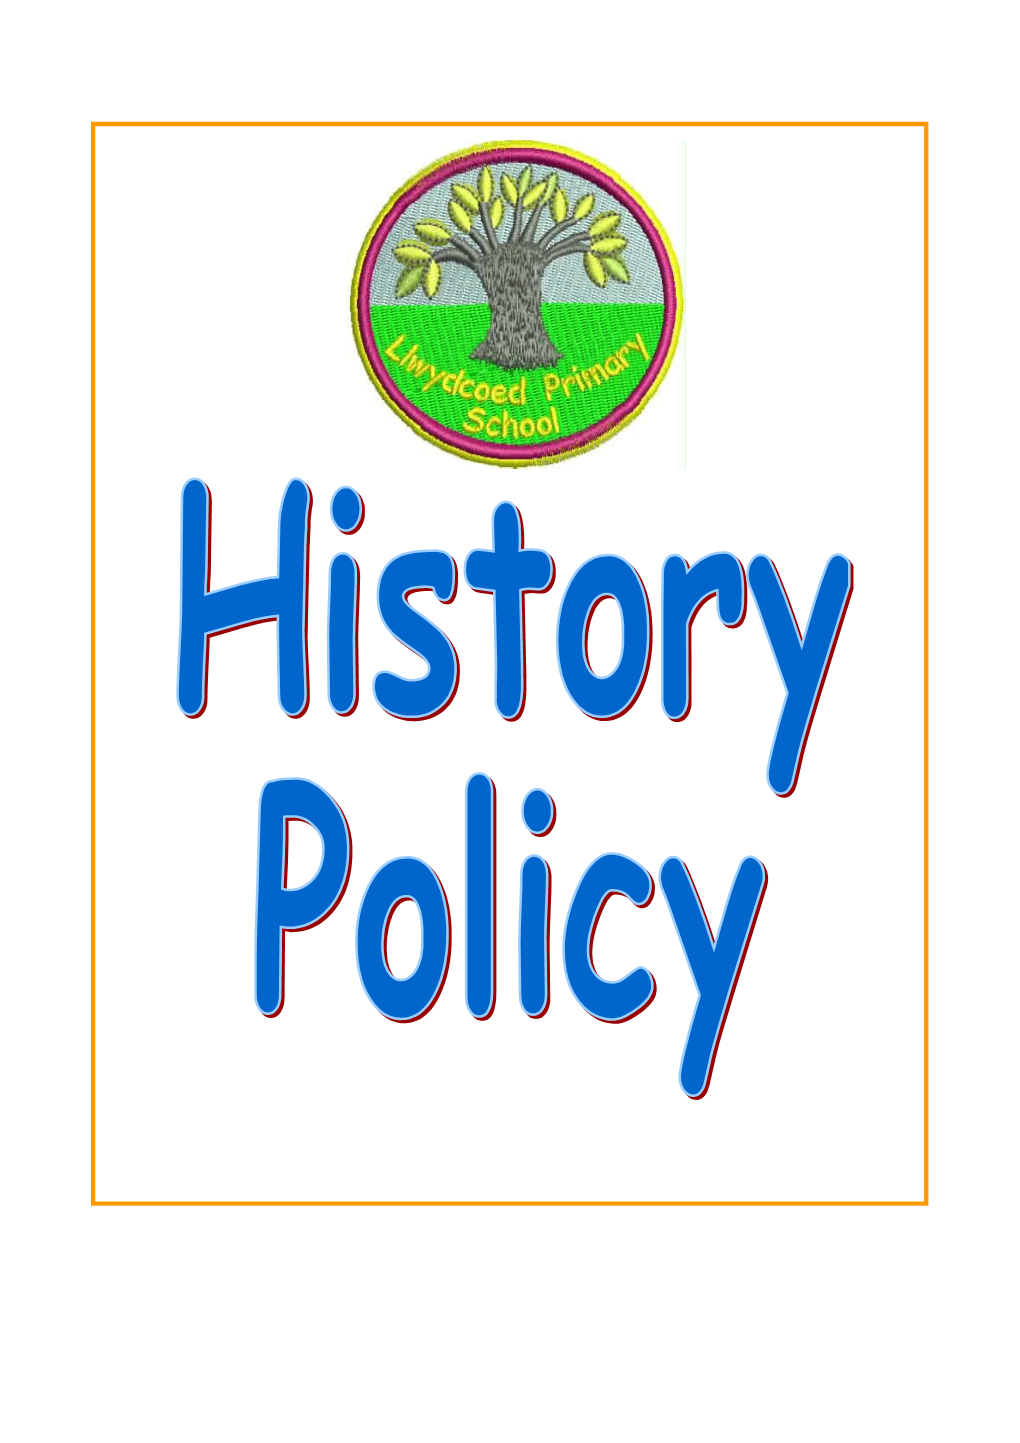 Policy on History